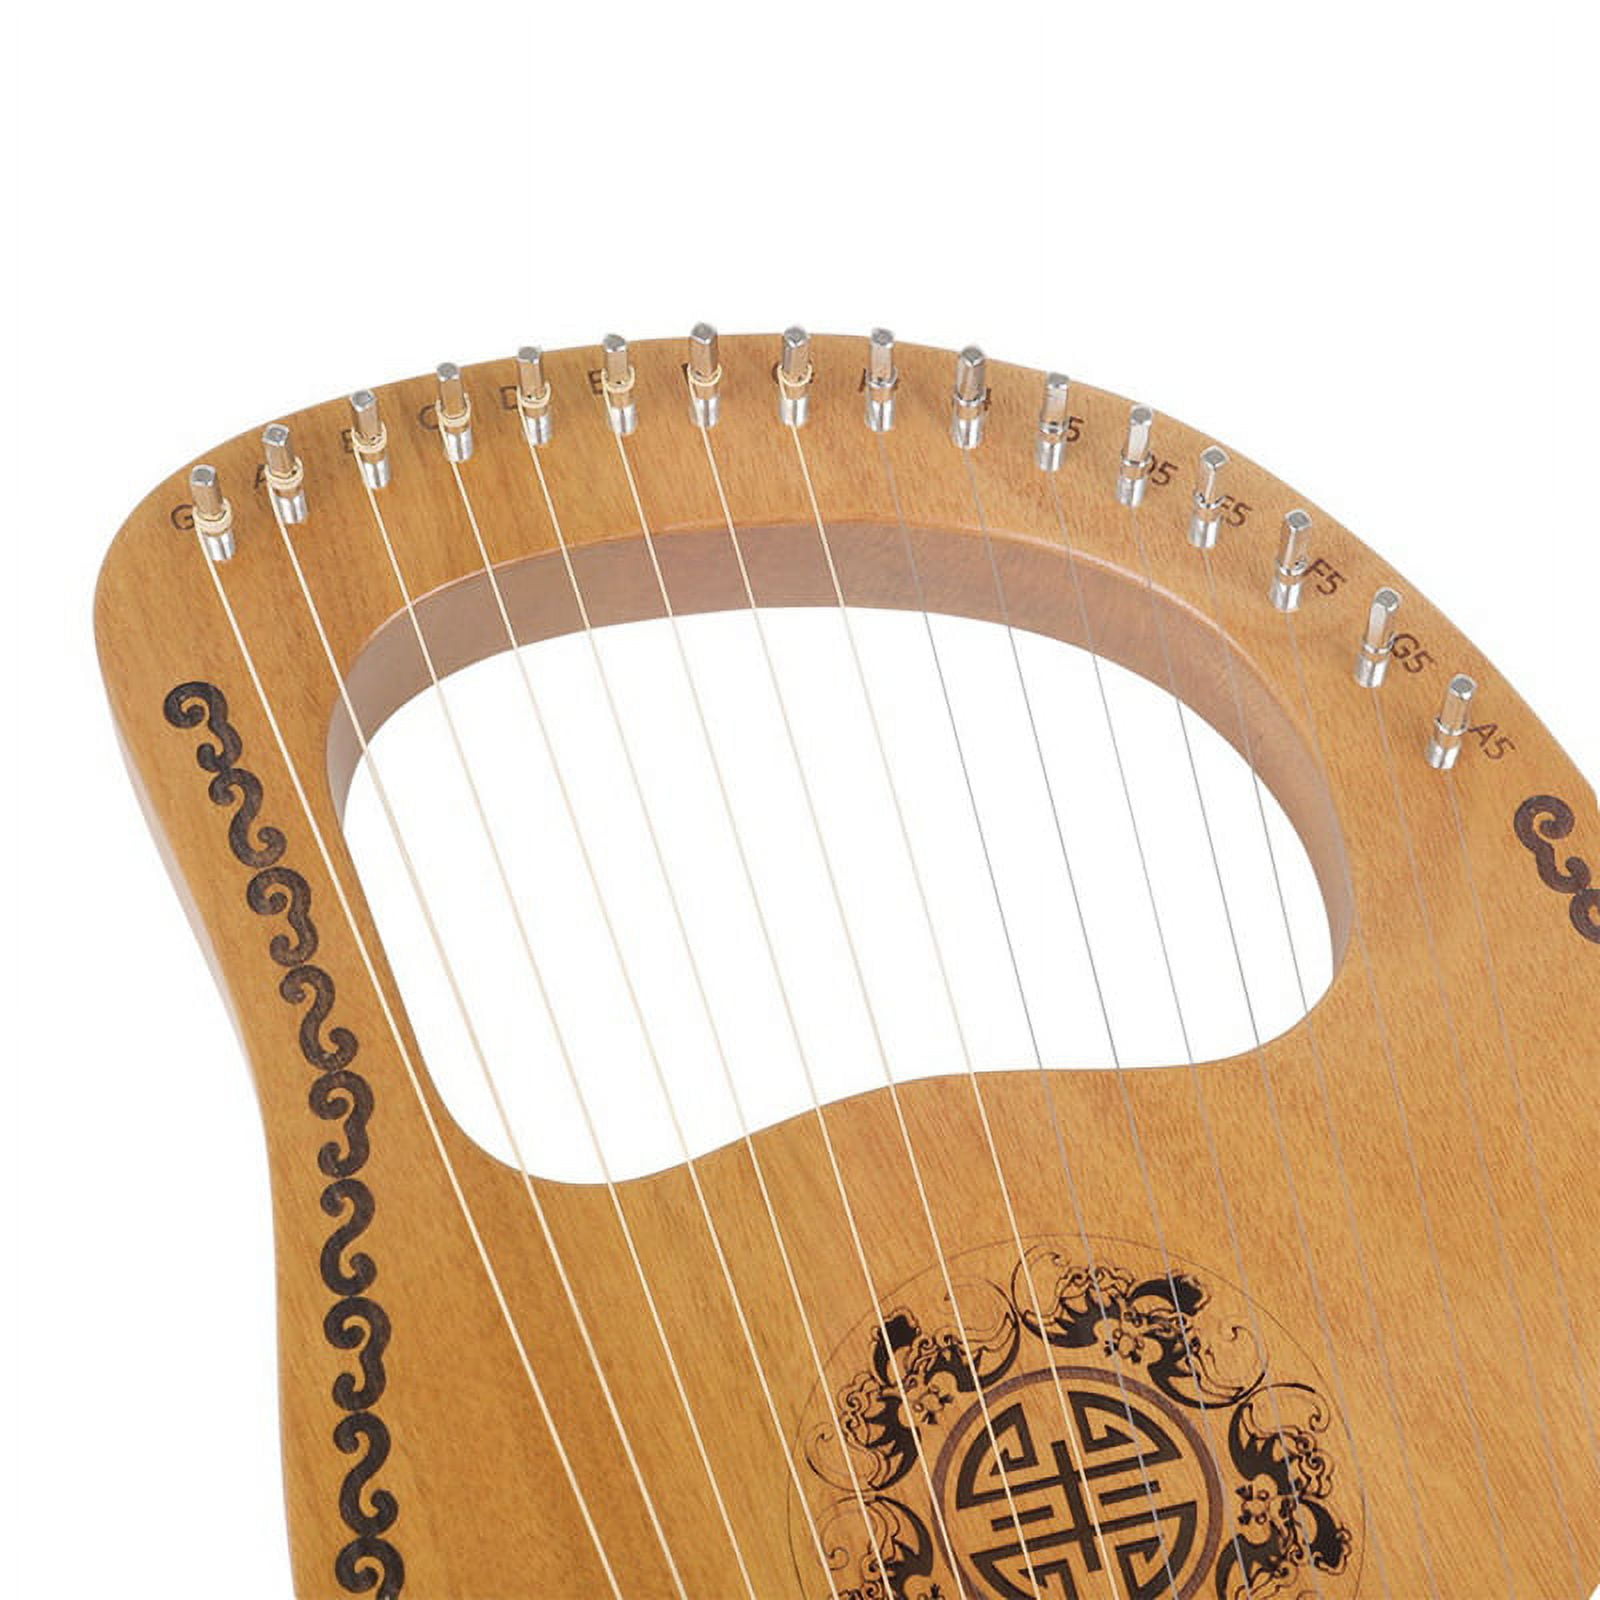 Lyre Beginner 16-String Lyre Small Harp Small Portable Small and